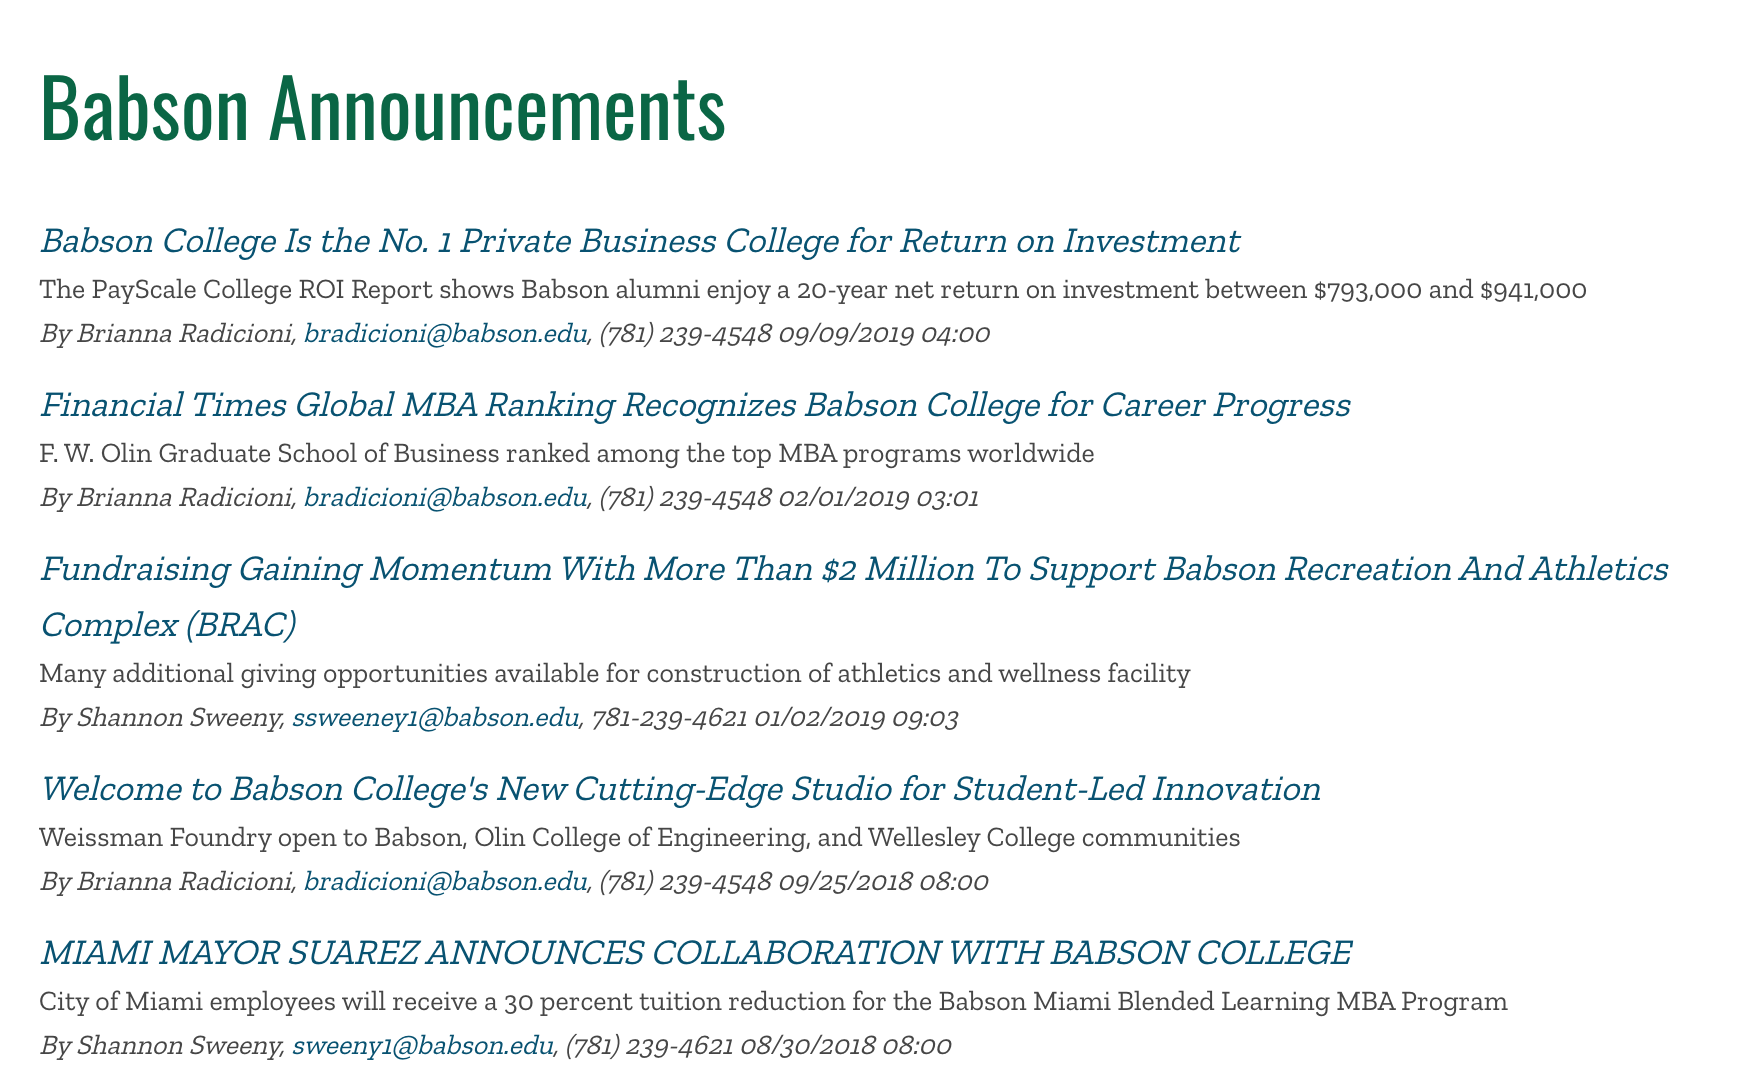 Babson Announcement feed